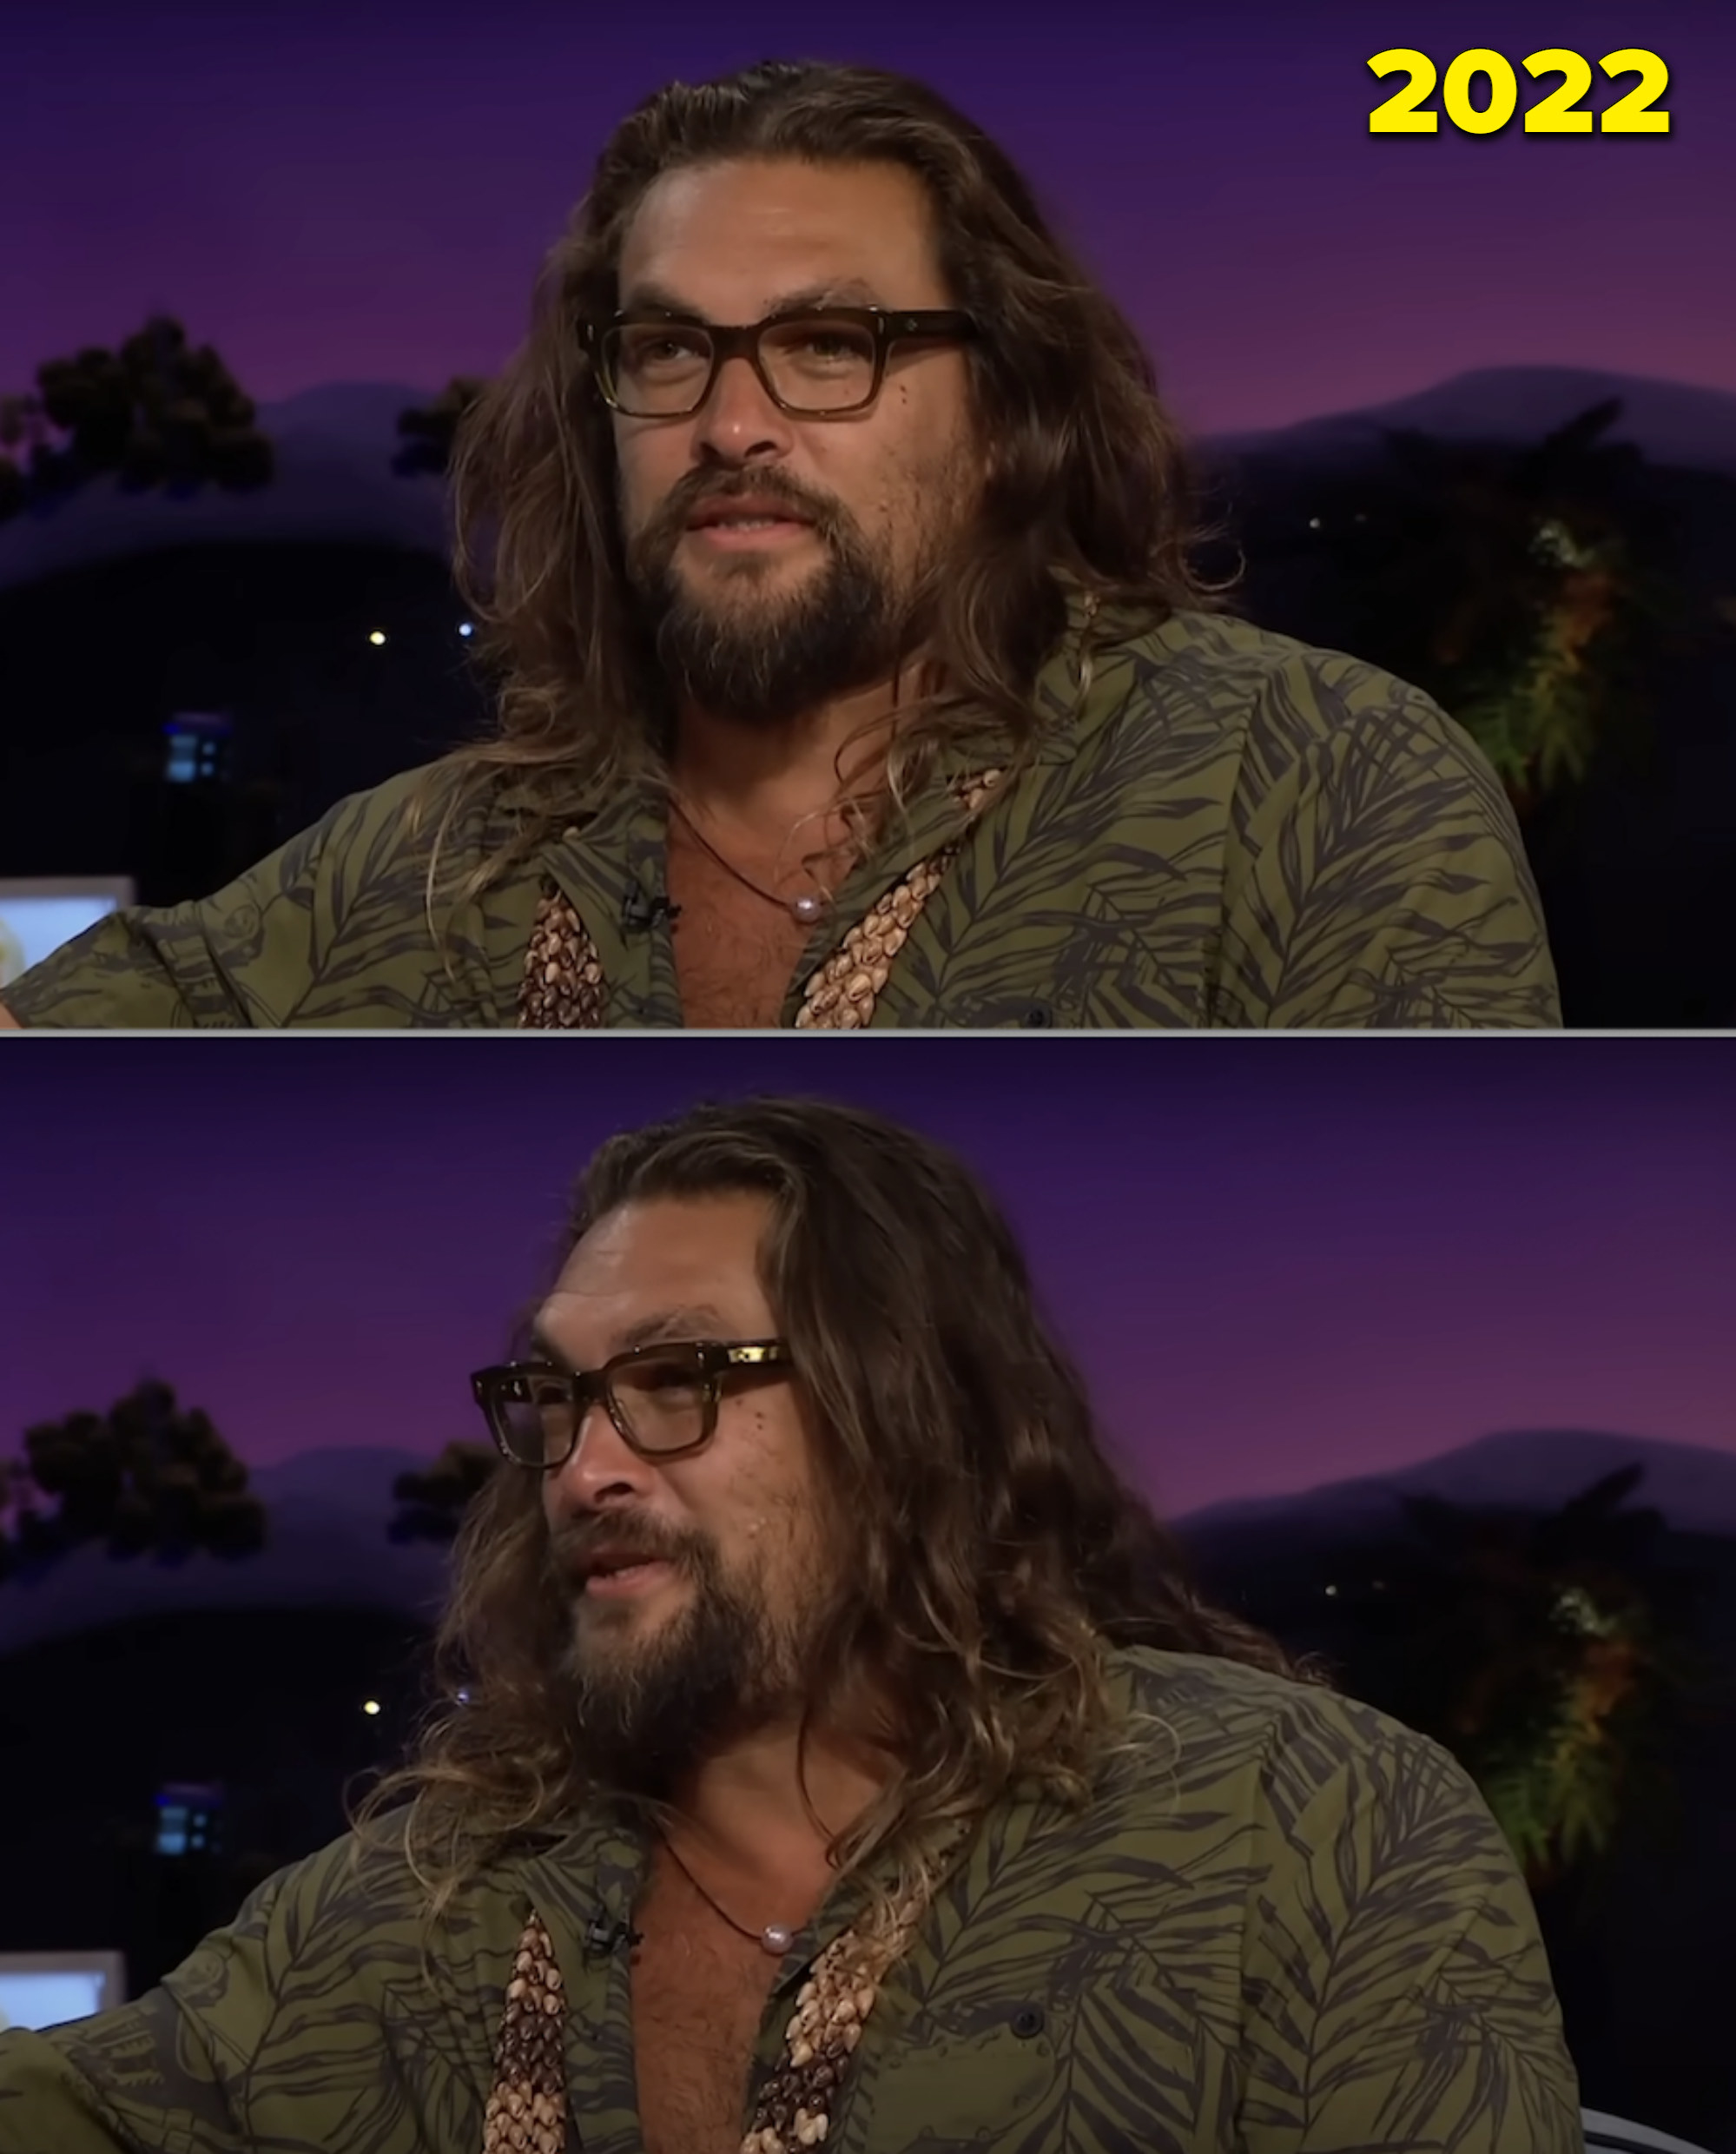 Jason on &quot;The Late Late Show&quot;